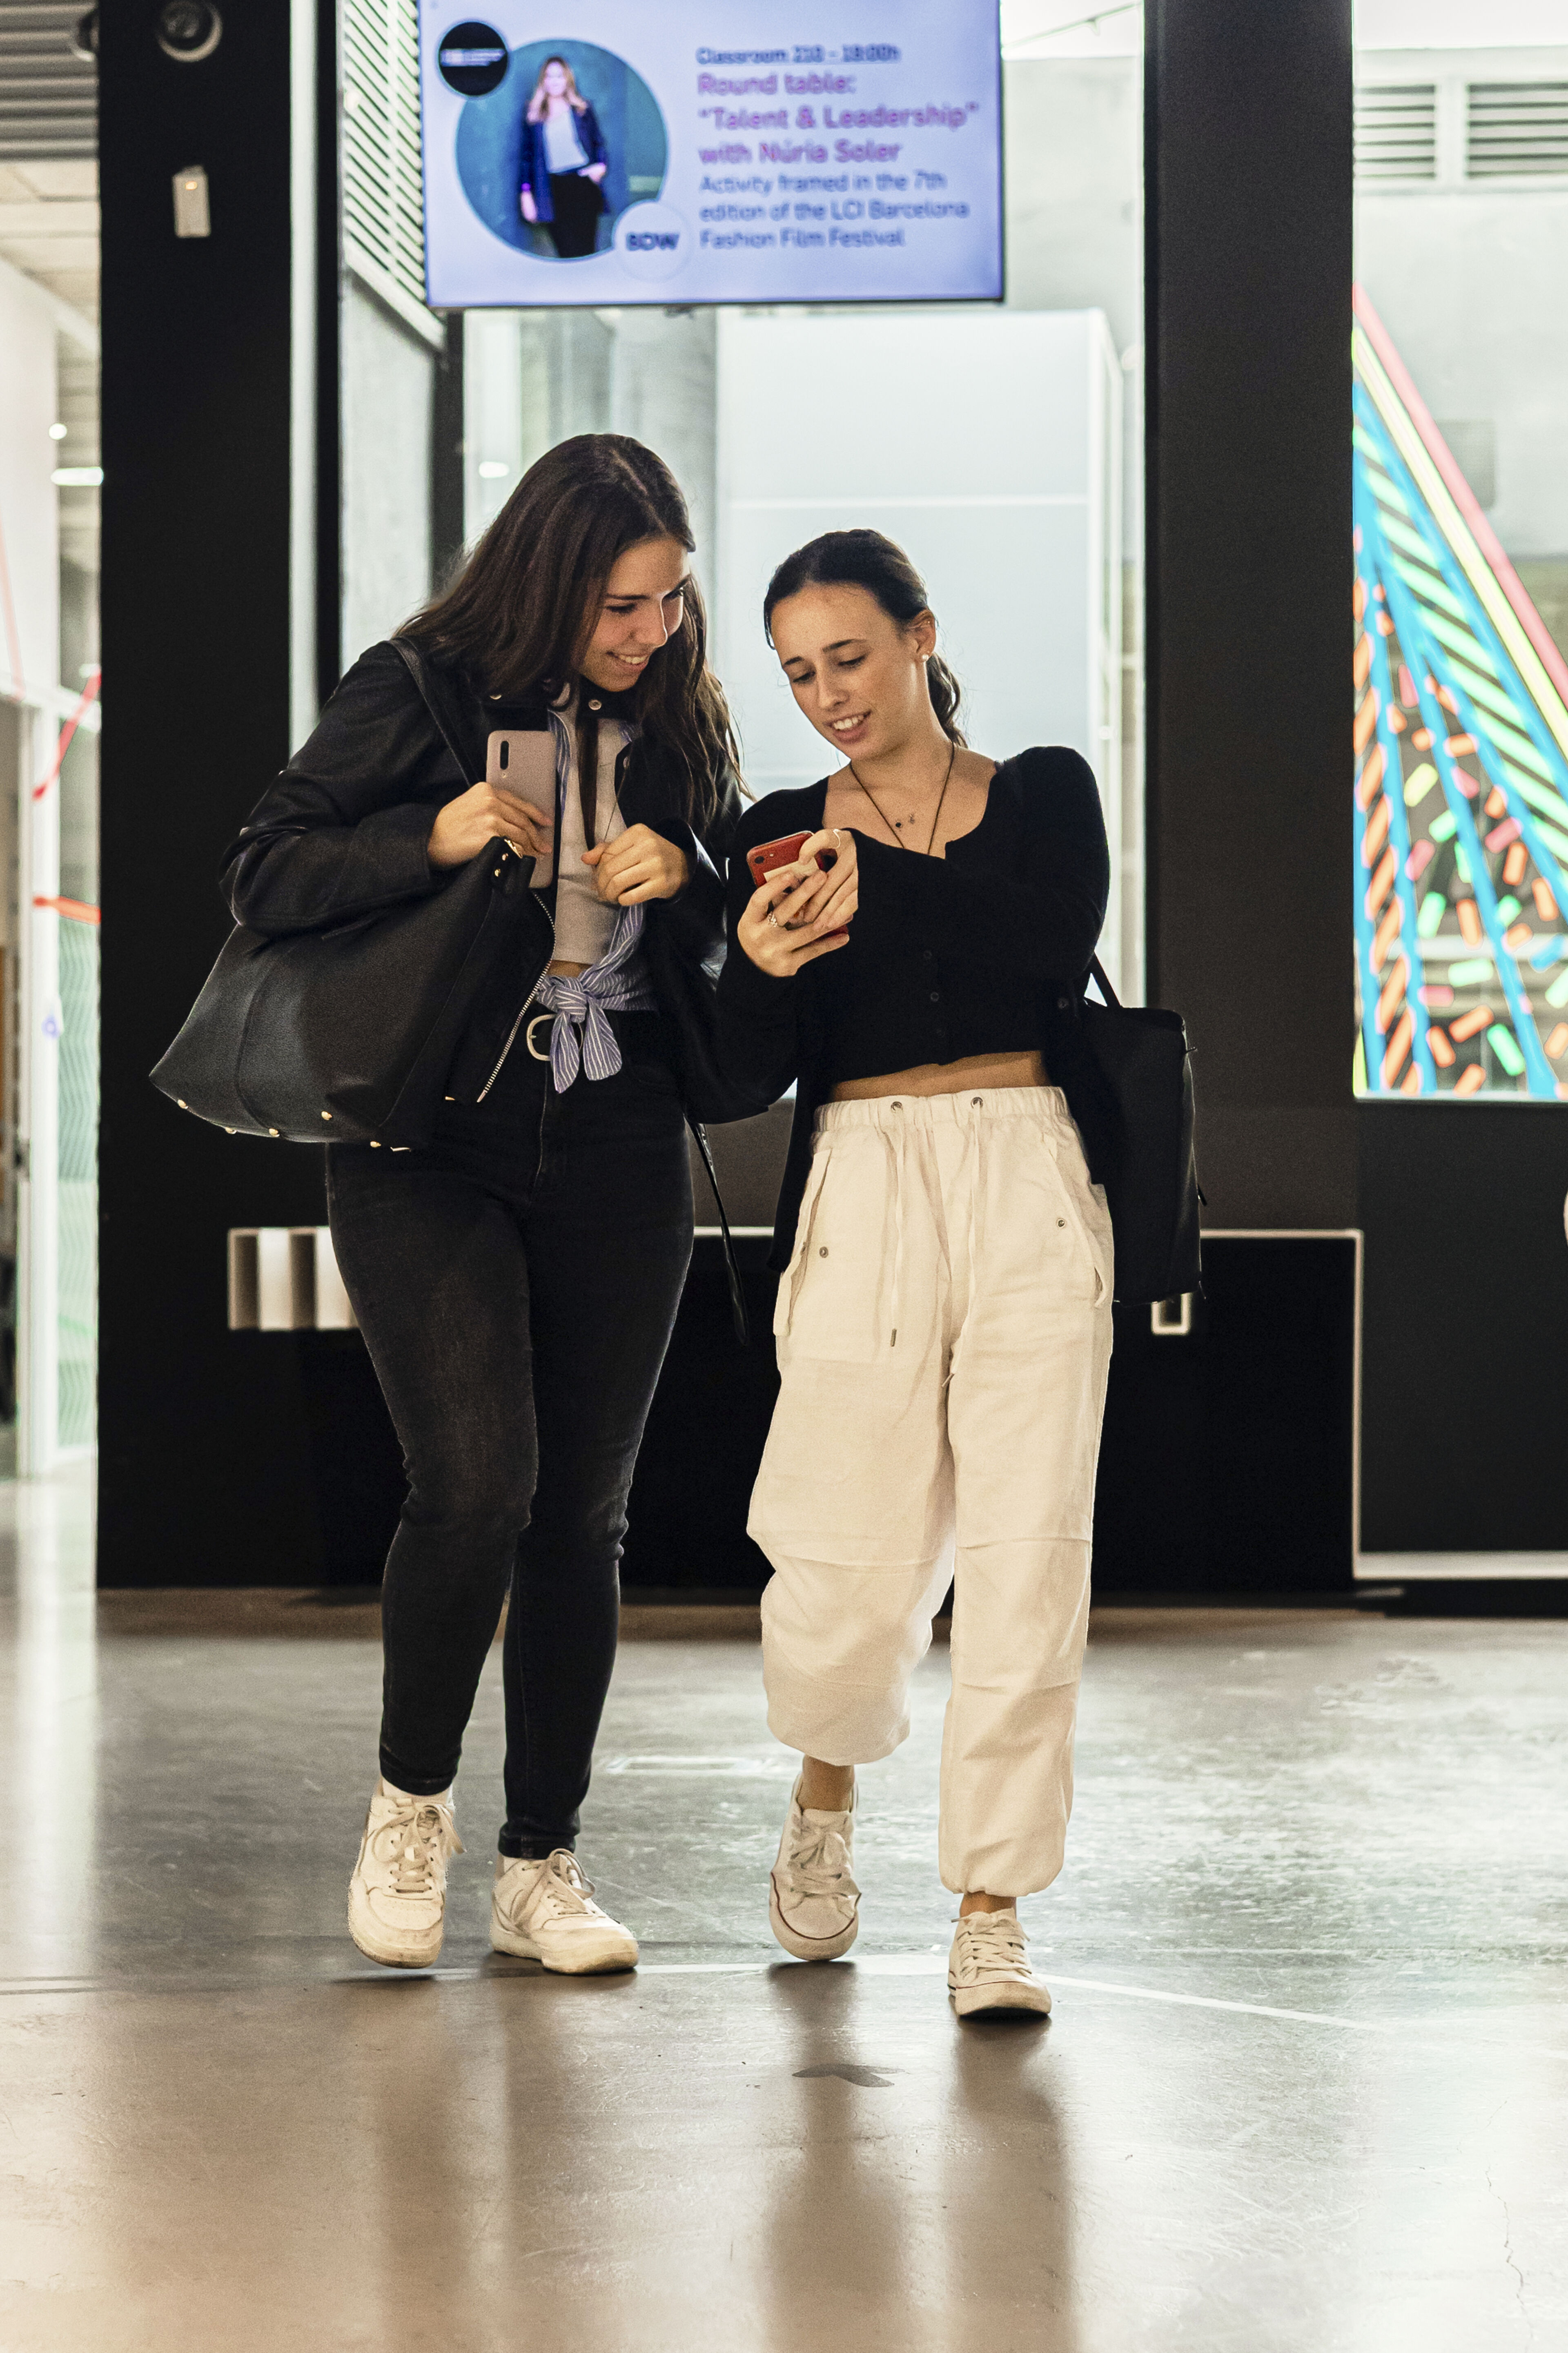 Two women walking and looking at a smartphone together, sharing a moment.